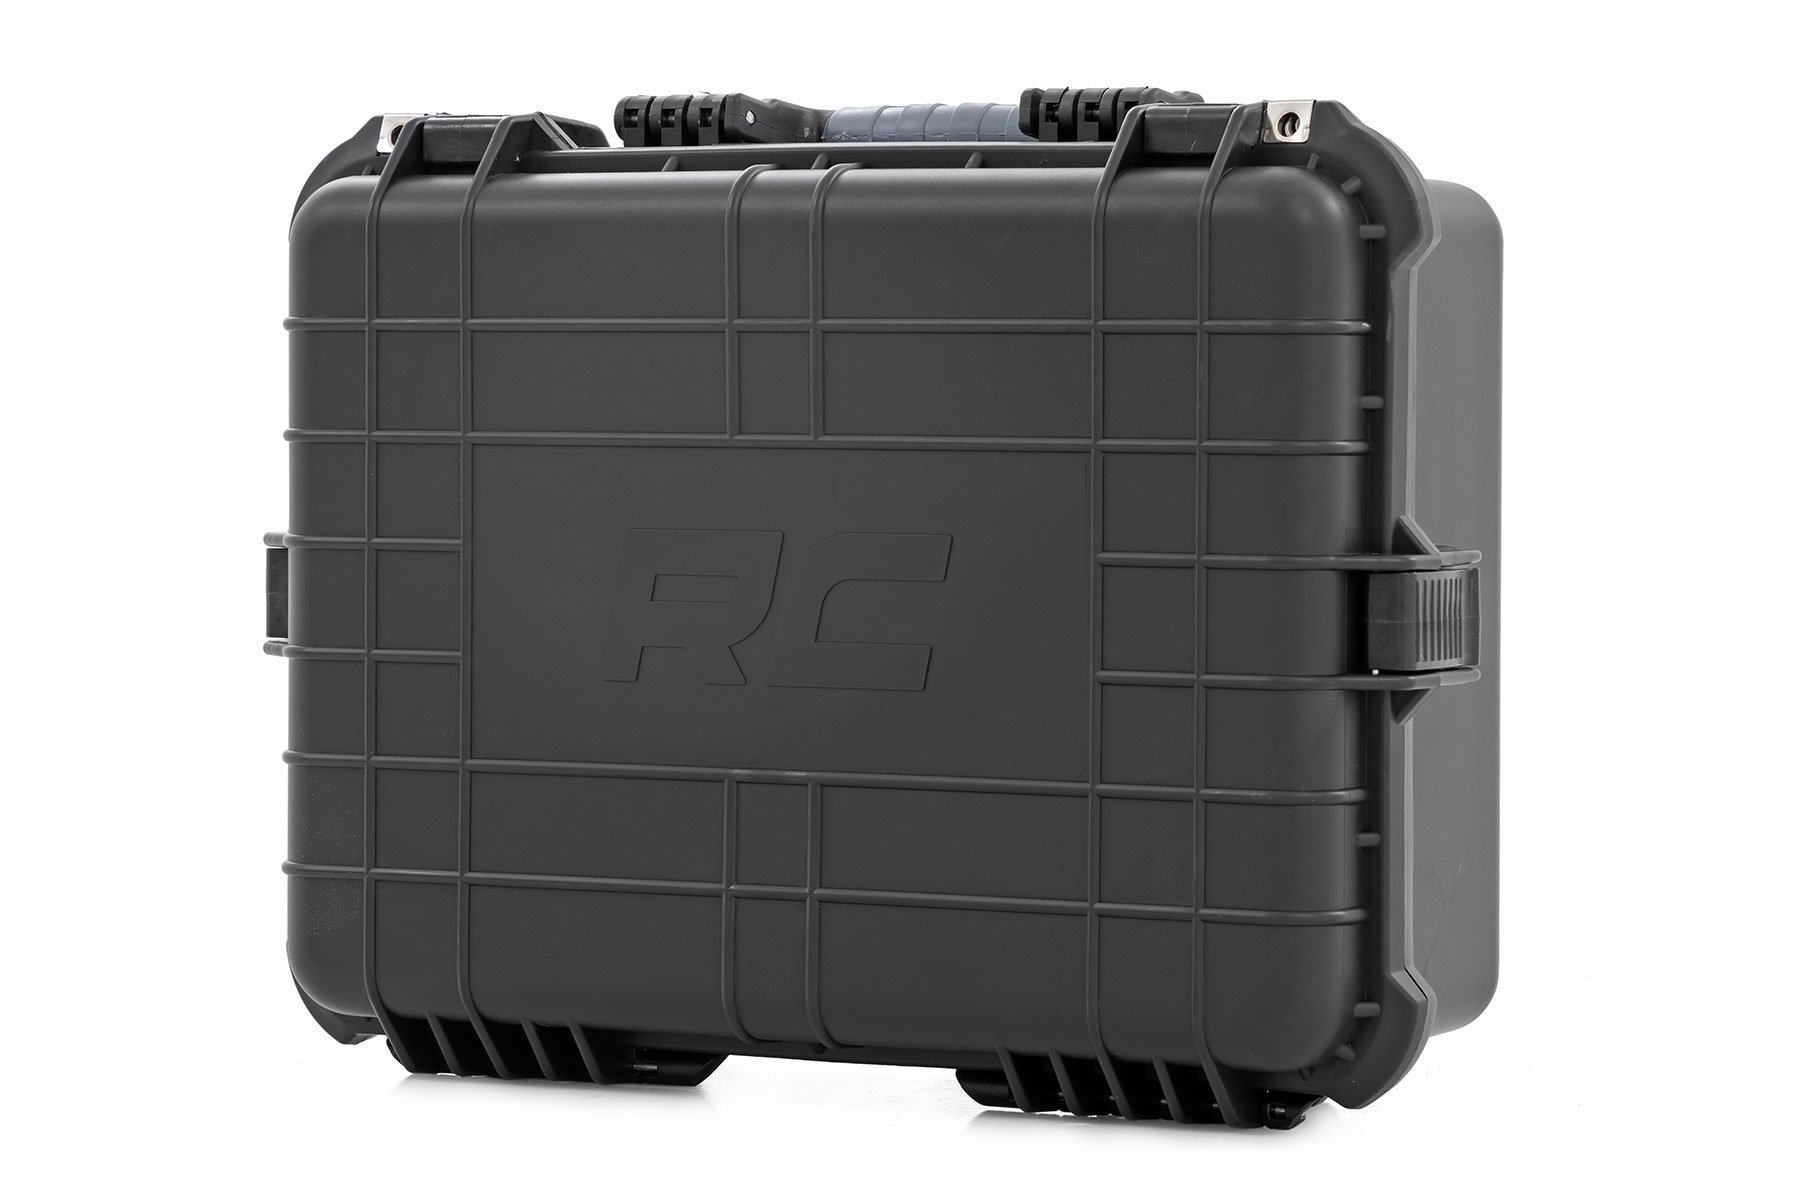 Buy Royalford Family Storage Box, 40L Plastic Clear Container